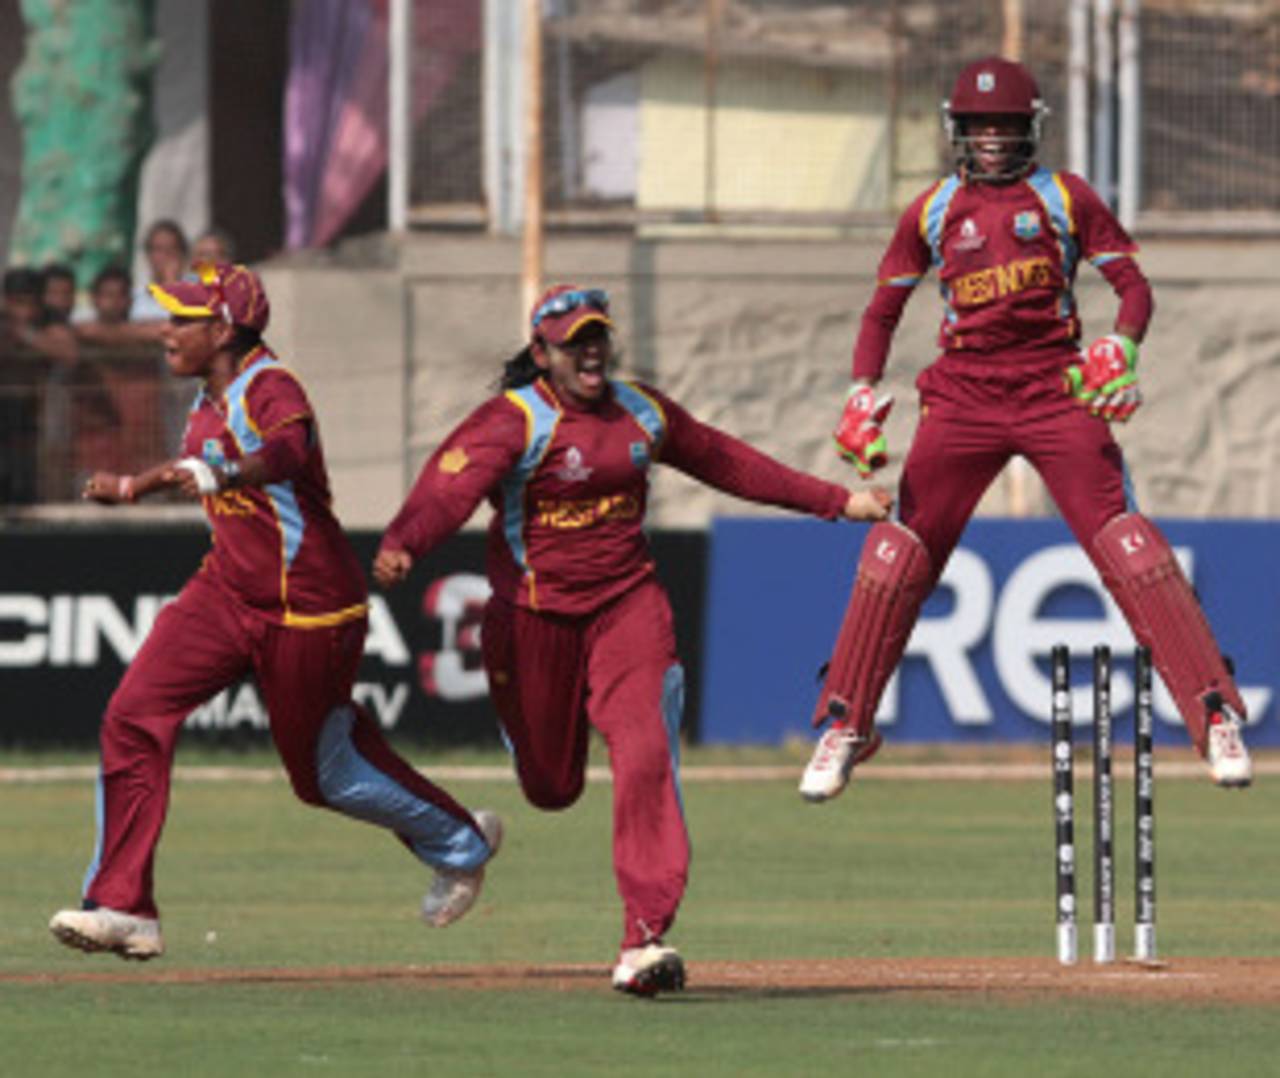 West Indies players react after defeating Australia to reach their first World Cup final, Australia v West Indies, Women's World Cup 2013, Super Six, Mumbai, February 13, 2013